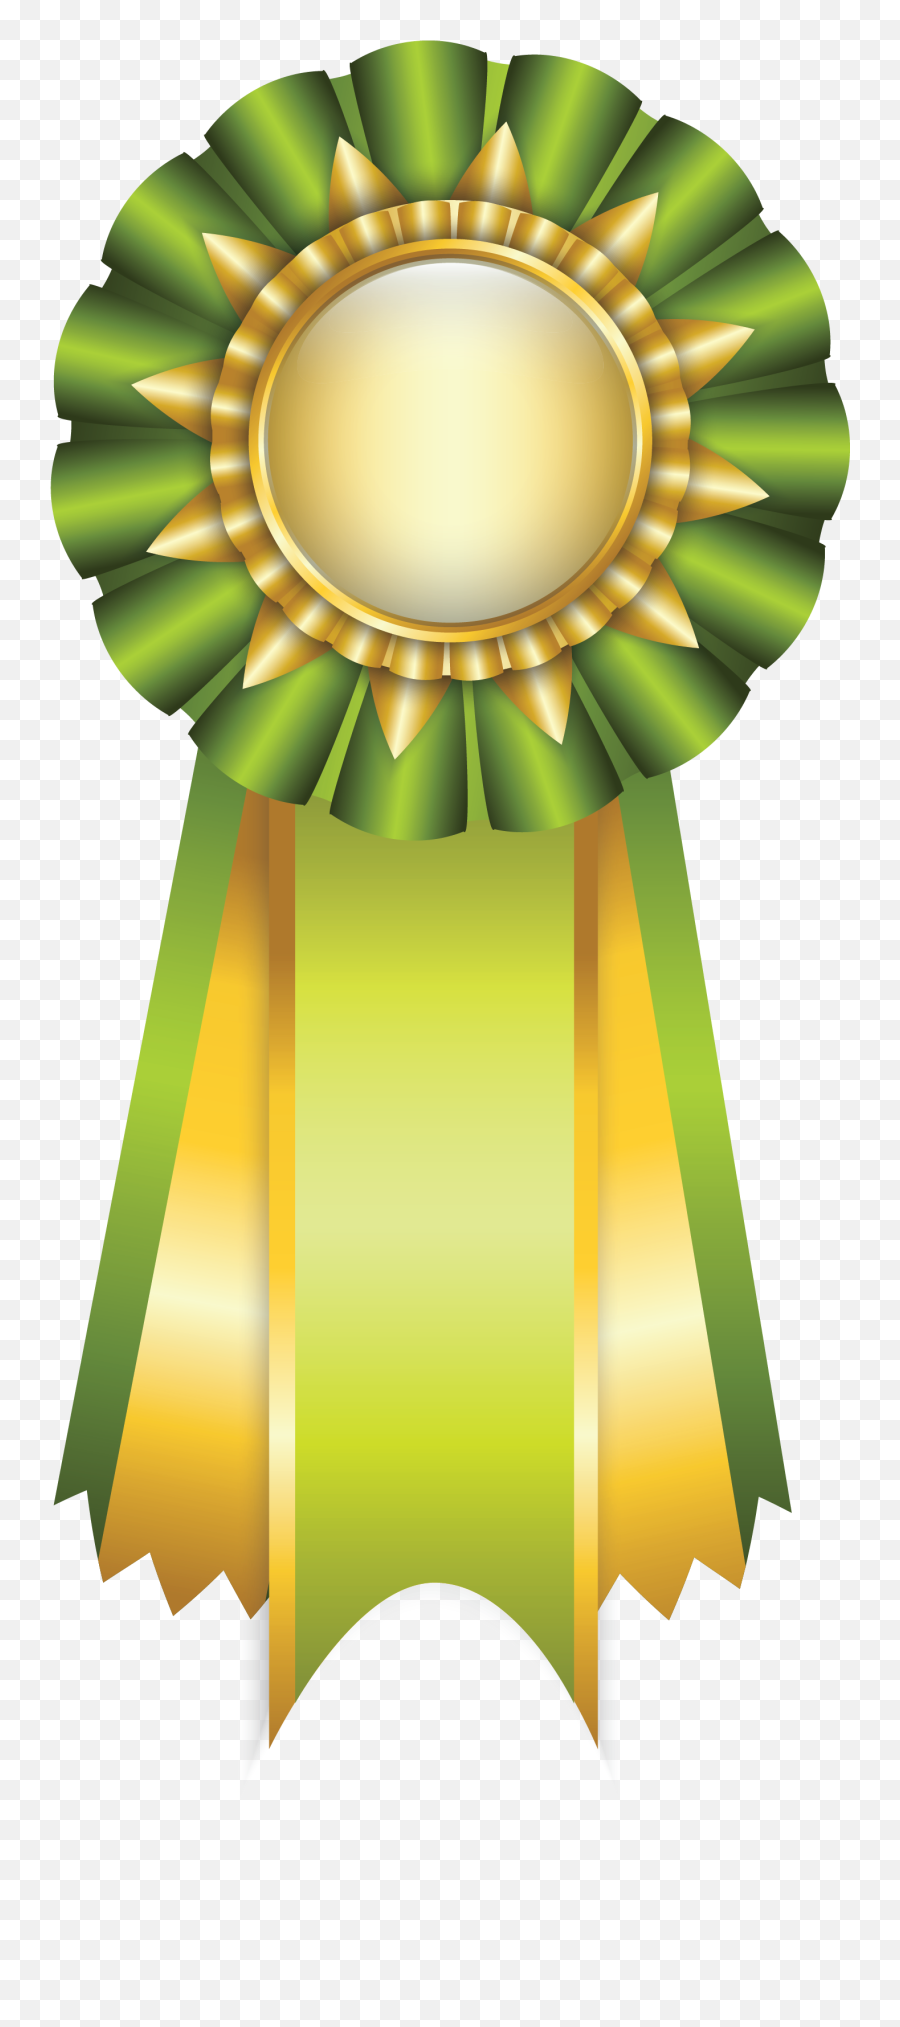 Green Rosette Ribbon Png Clipart Picture Gallery - Ribbon Design For Graduation,Free Transparent Images